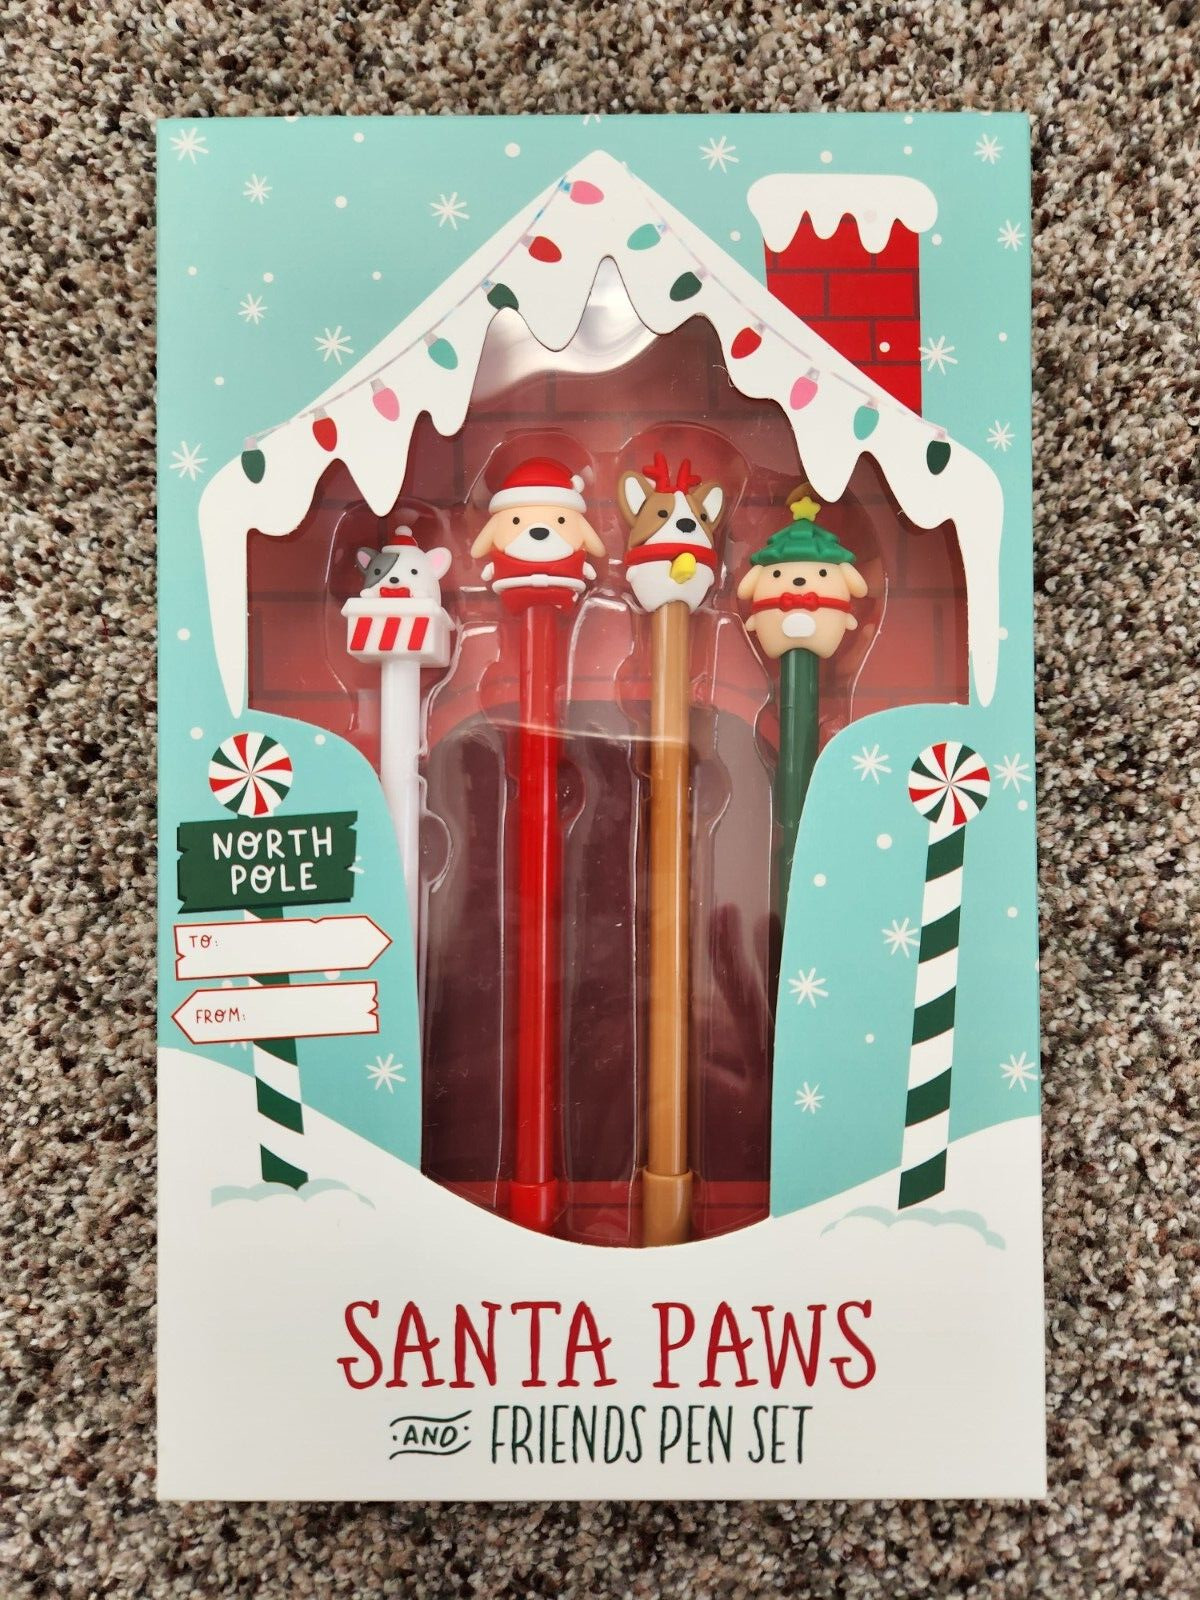 Santa Paws and Friends Pen Set of 4 Gift Boxed Christmas